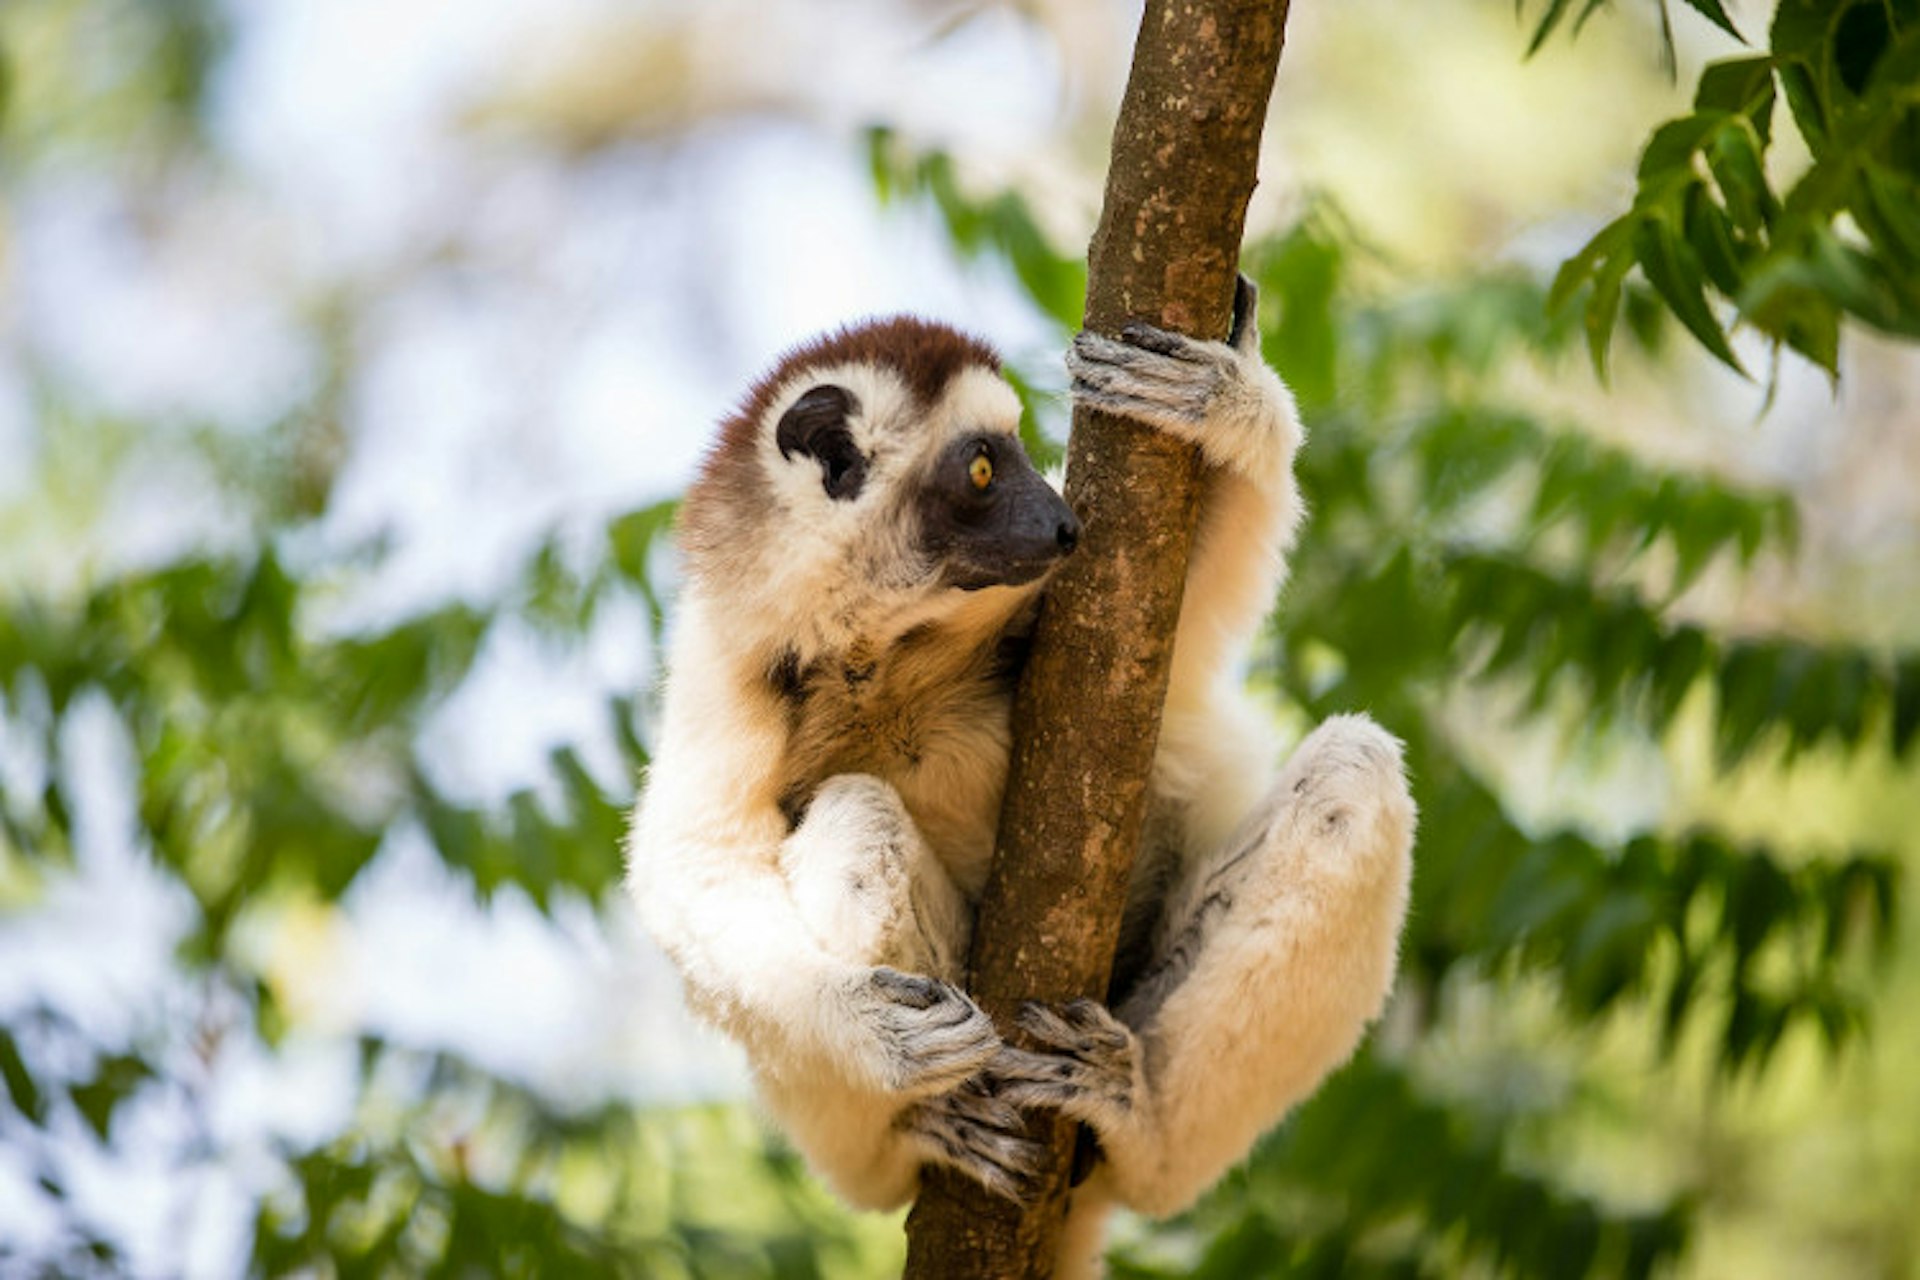 A Verreaux's sifaka lemur keeps a beady watch in the Berenty Reserve, Madagascar. Image by nomis-simon / CC BY 2.0